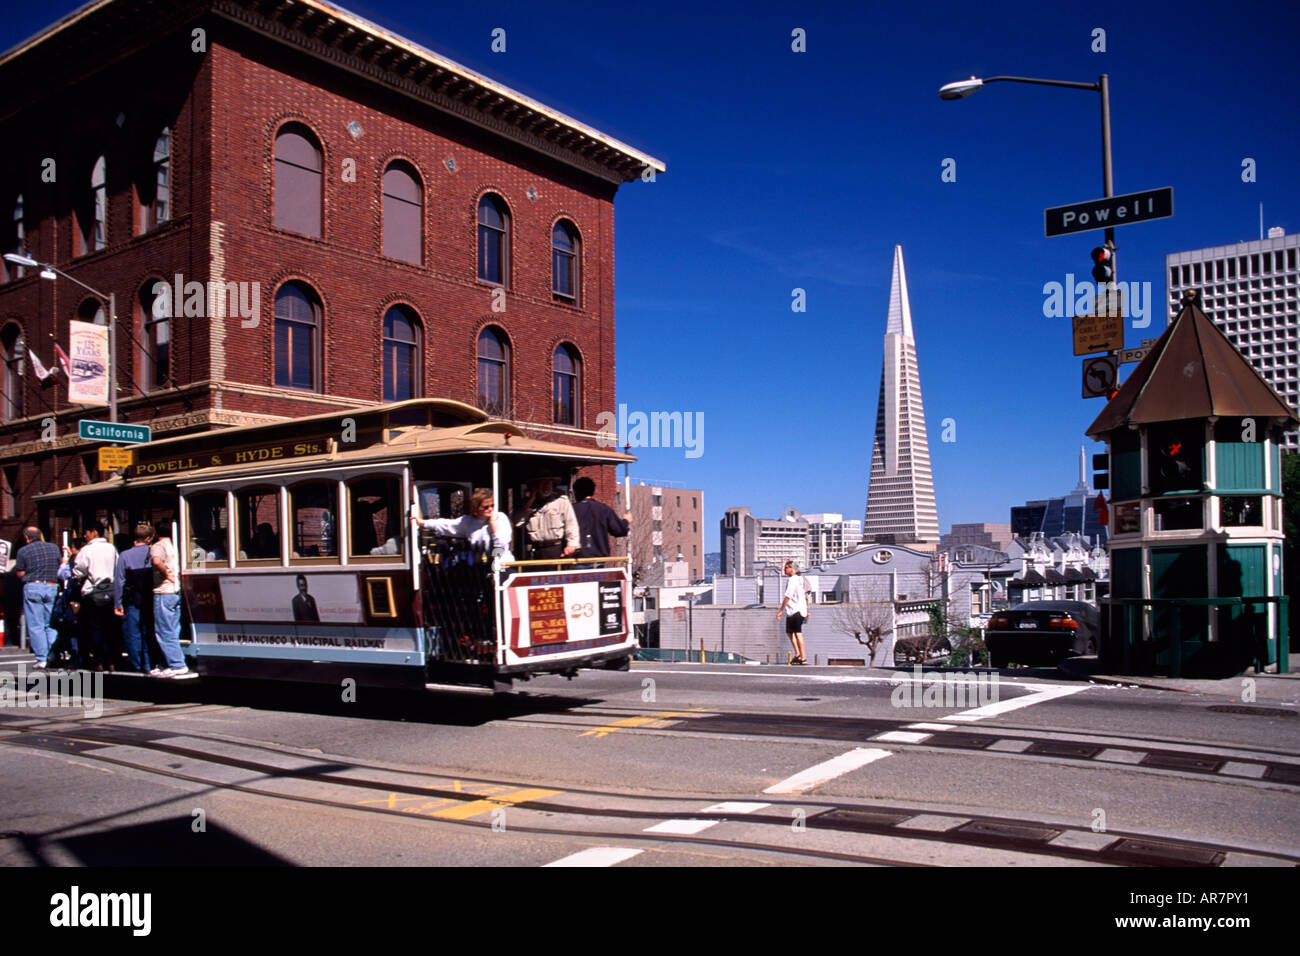 A tram at the intersection of Powell and California streets in San Francisco. Stock Photo